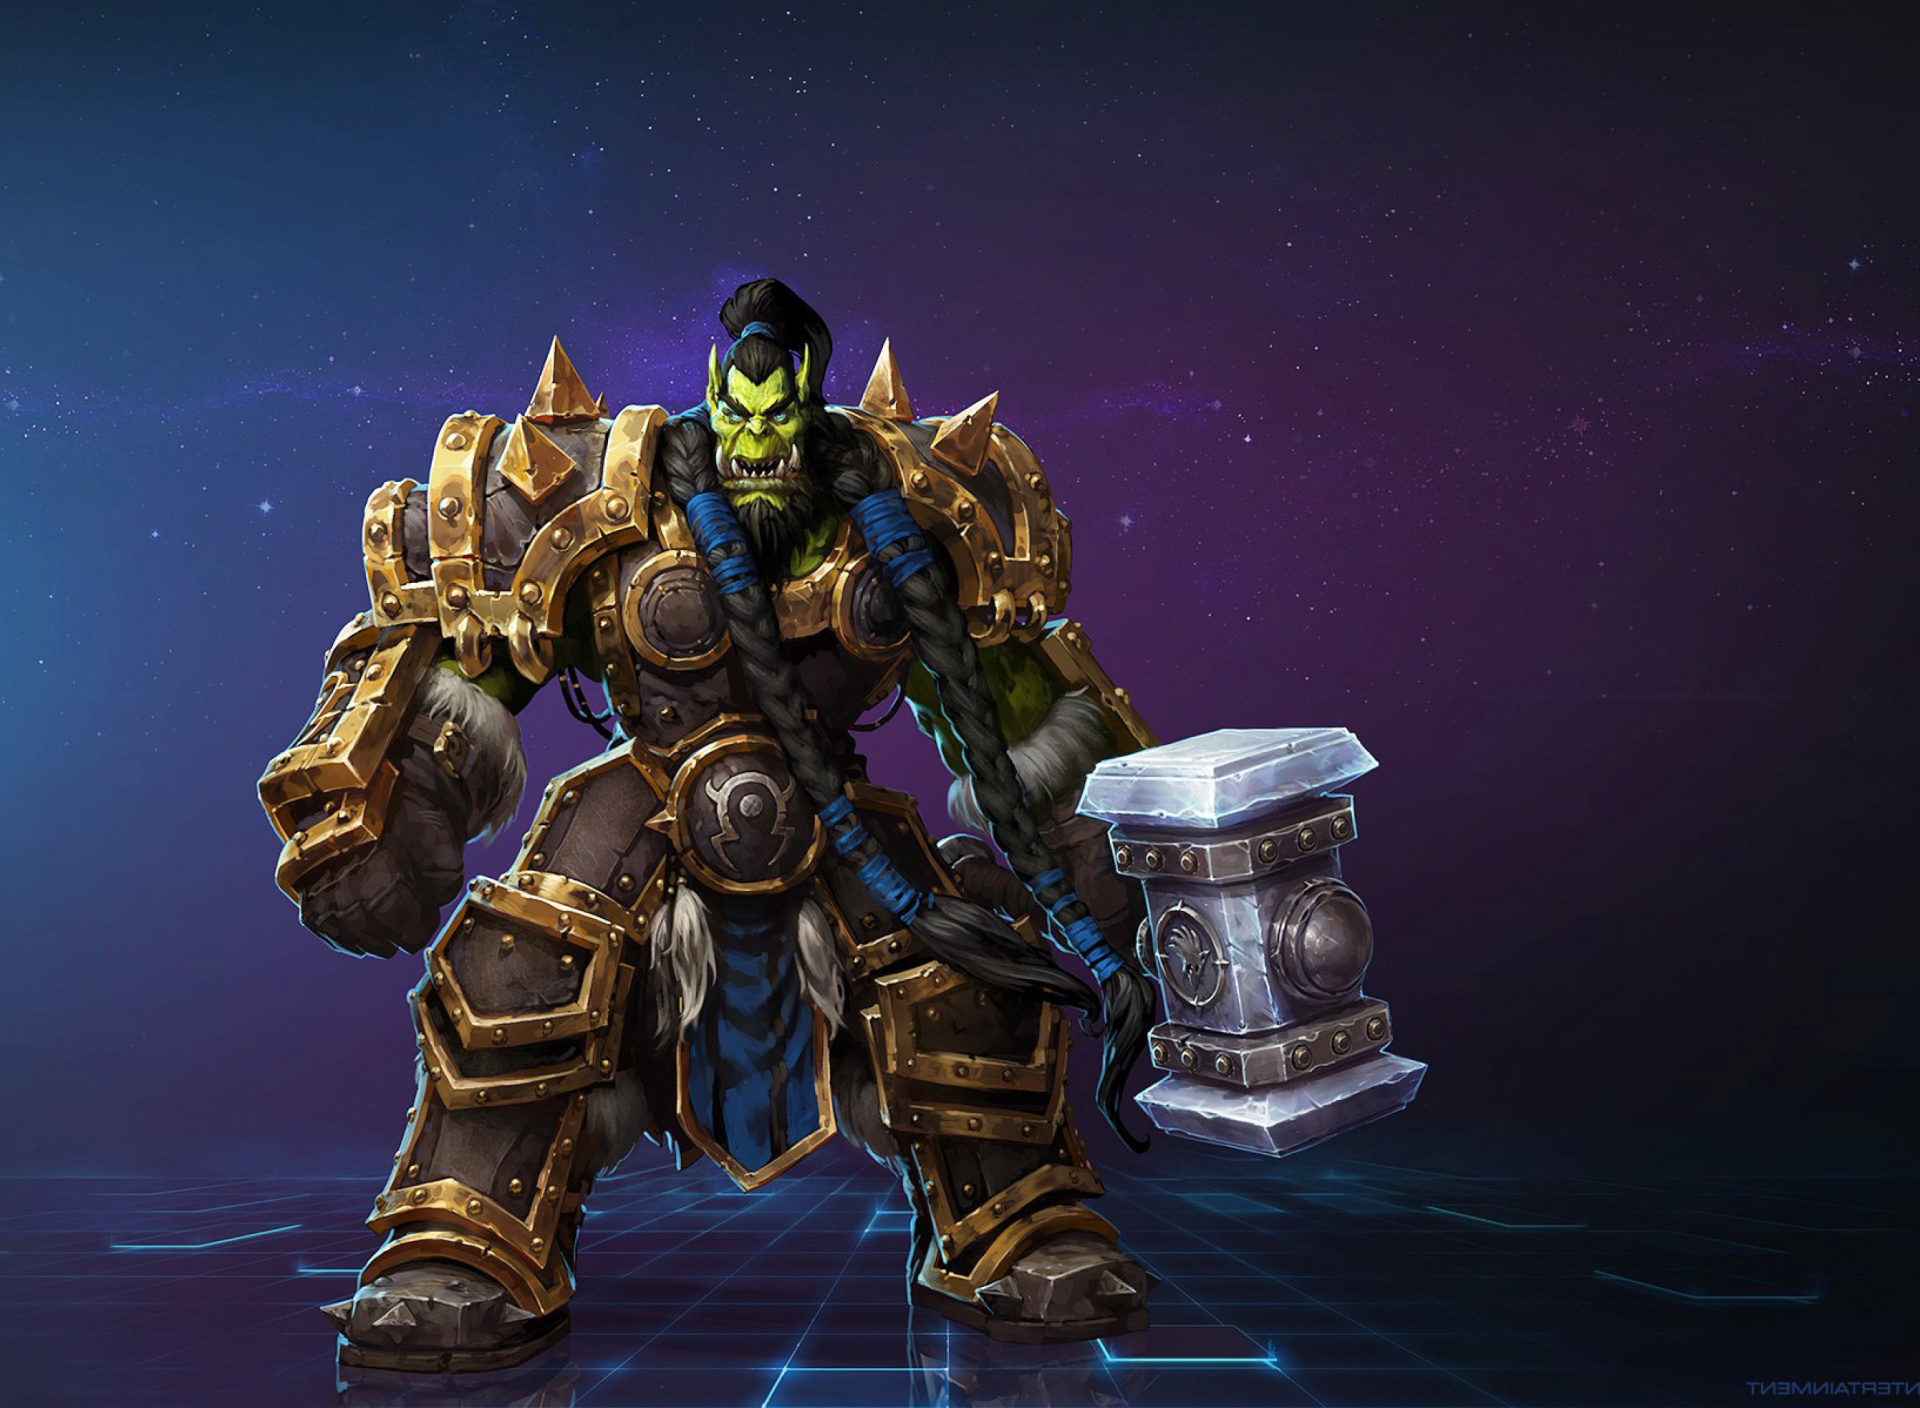 Heroes of the Storm multiplayer online battle arena video game screenshot #1 1920x1408